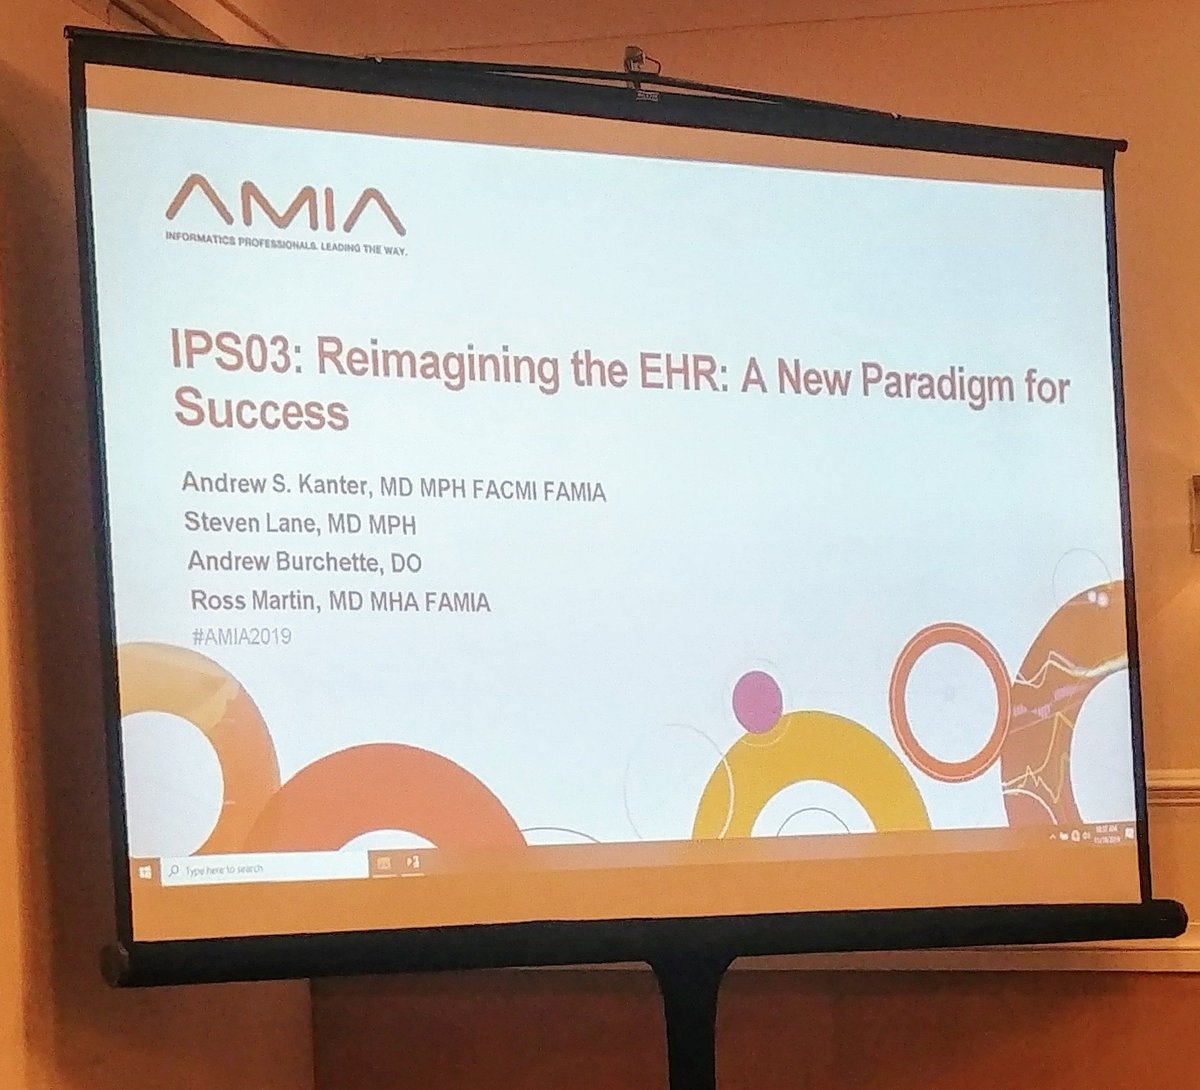 Looking forward to this session and insights from the esteemed presenters #amia2019 @AMIAinformatics